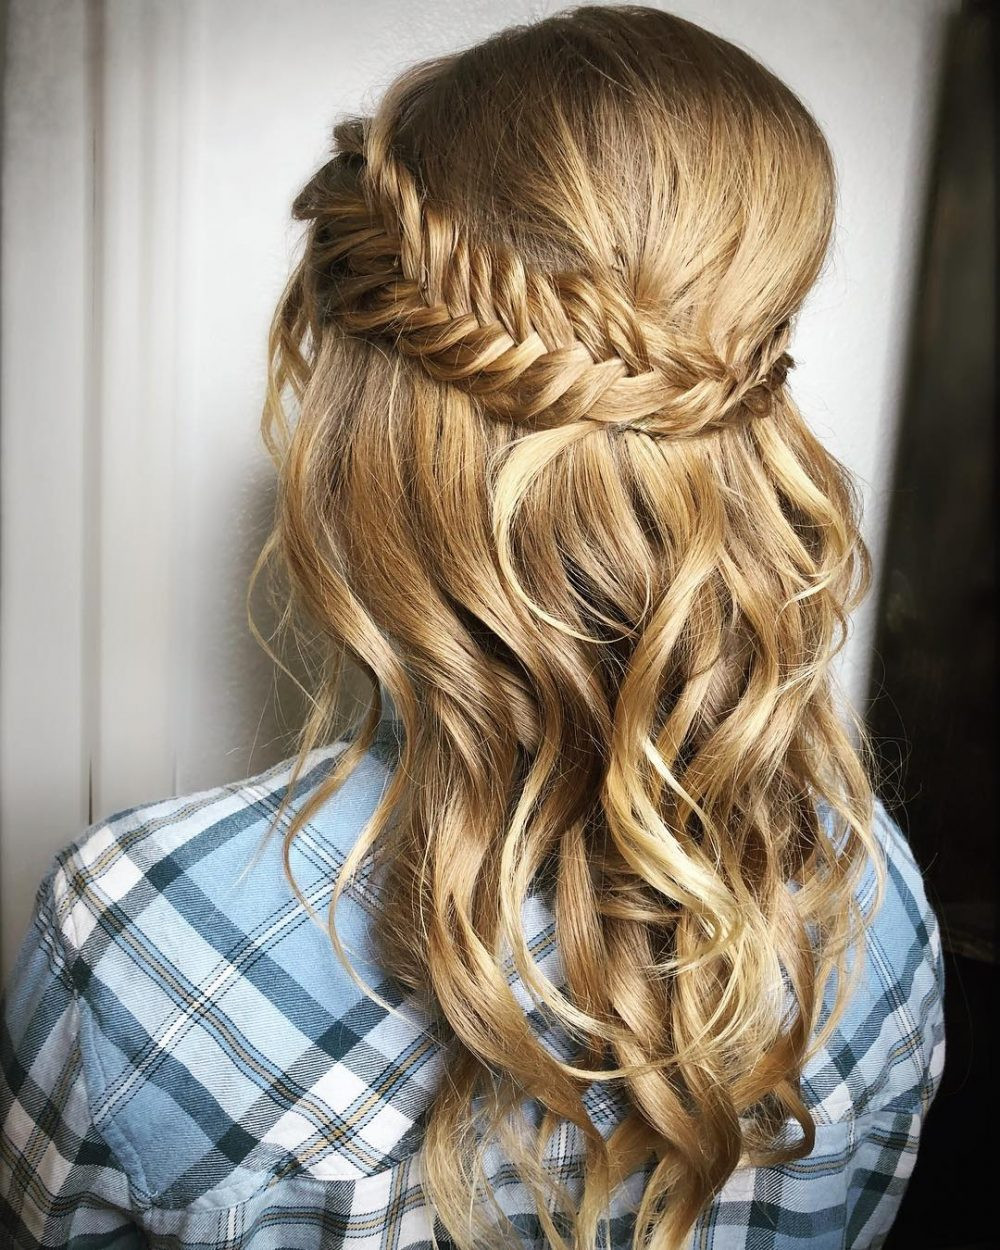 Prom Down Hairstyles
 27 Prettiest Half Up Half Down Prom Hairstyles for 2019